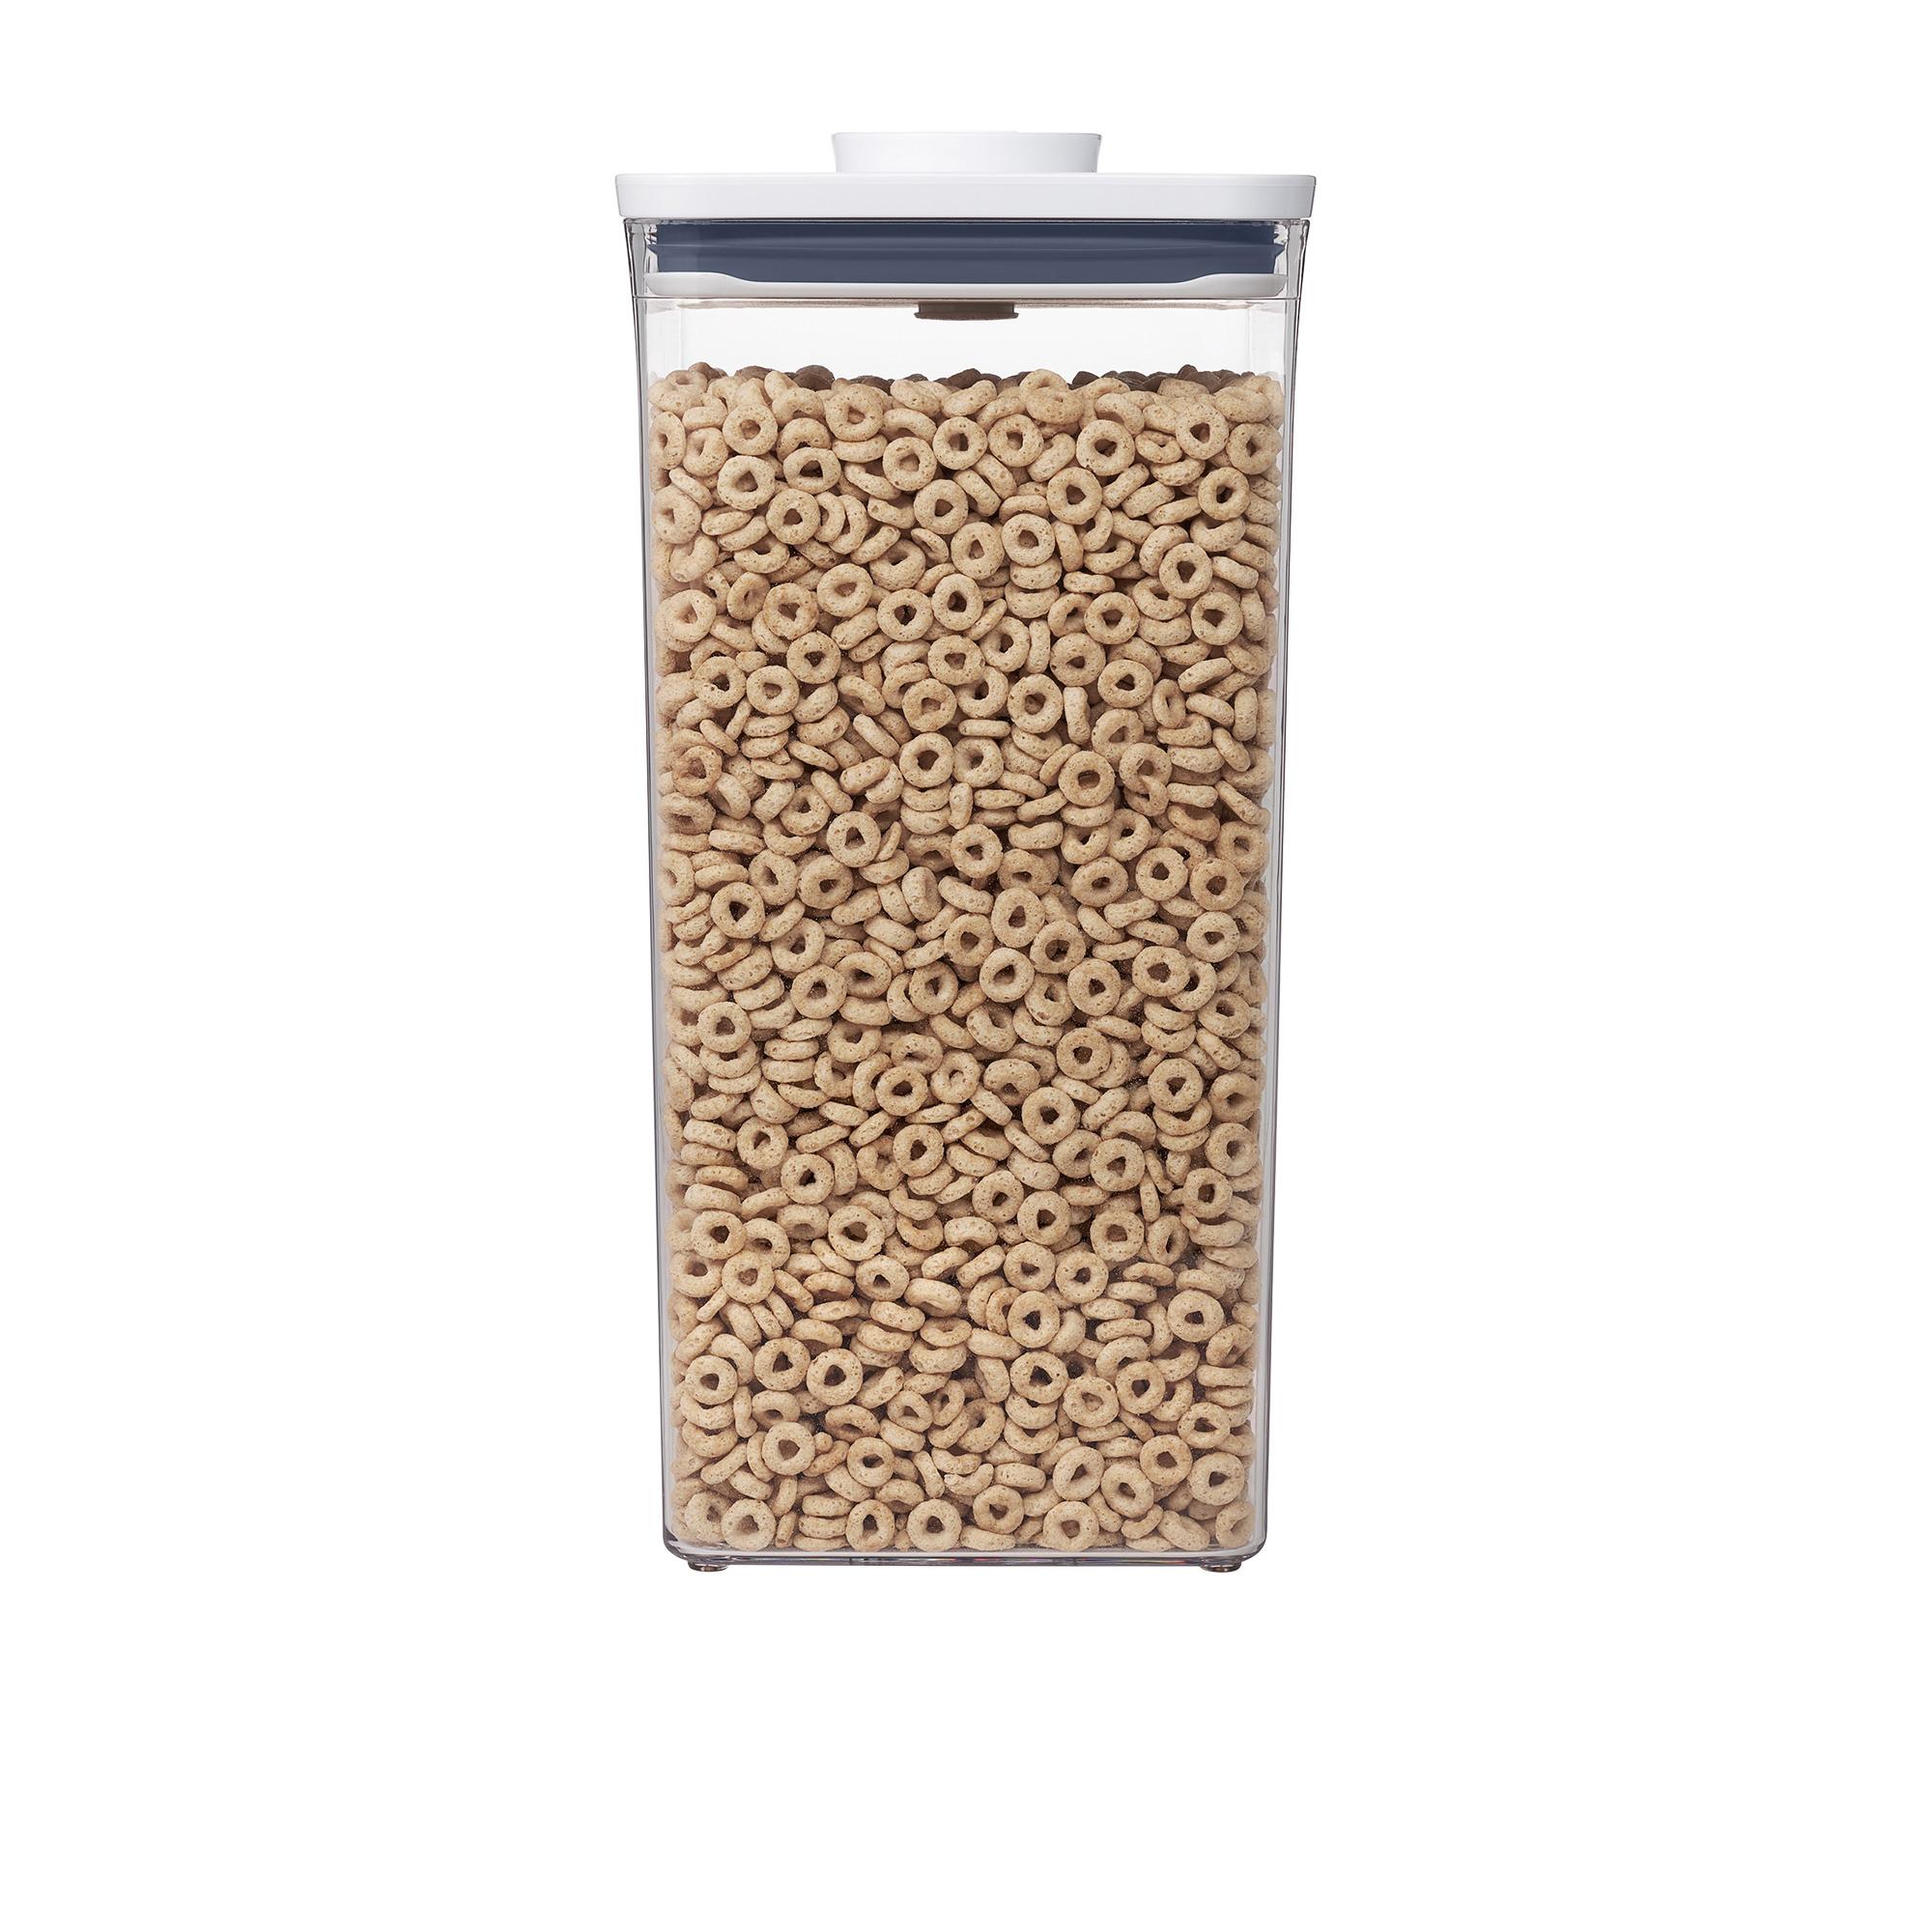 OXO Good Grips Square Pop 2.0 Big Container 5.7L Image 5